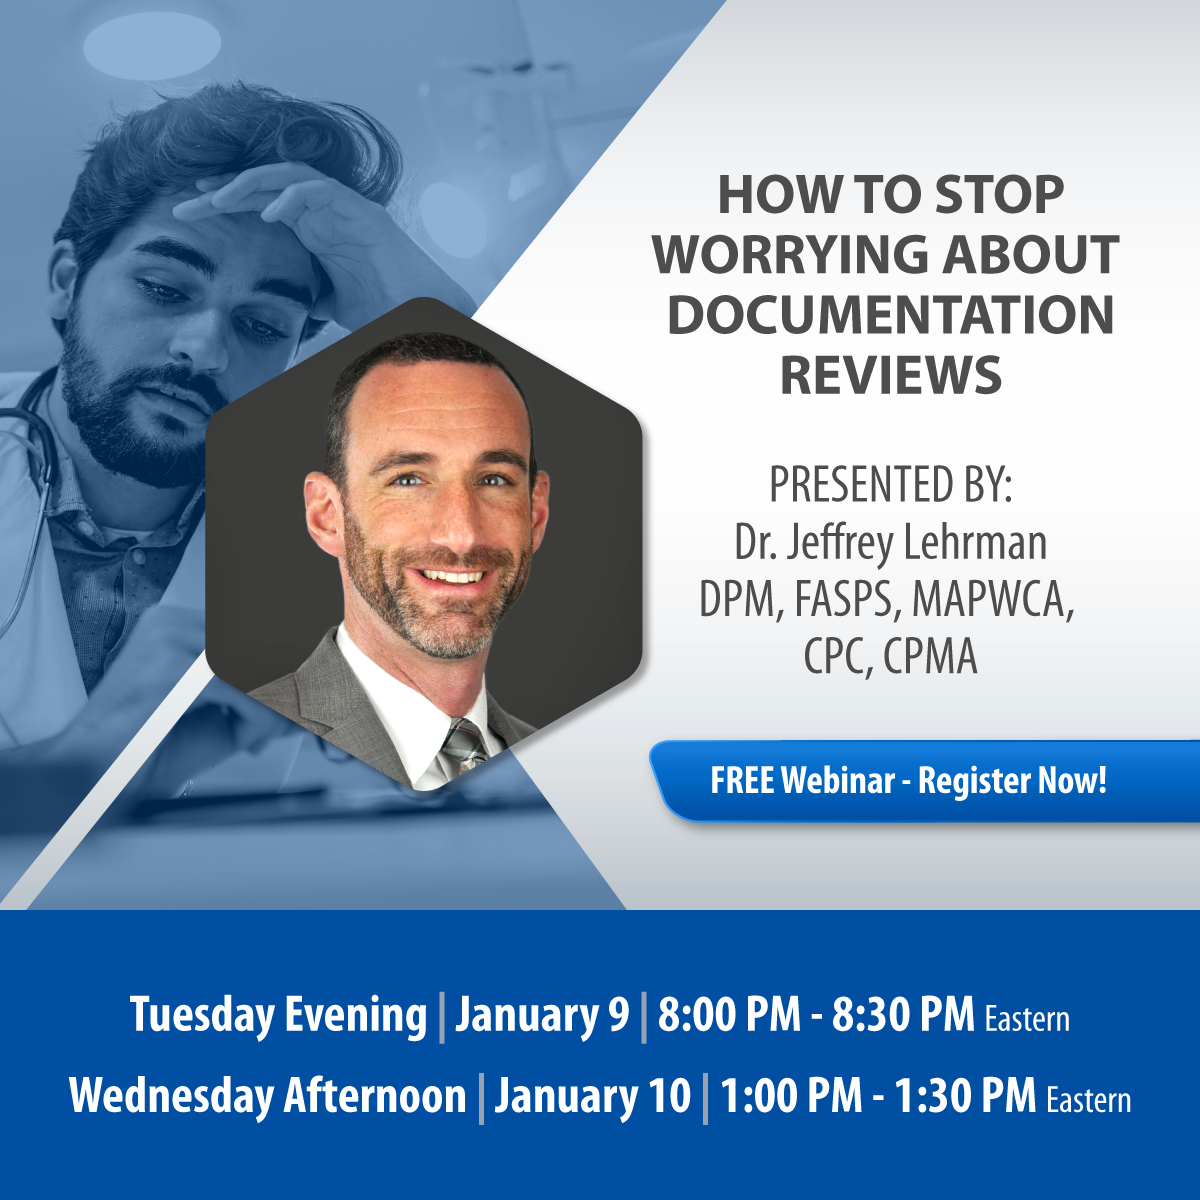 Webinar - How To Stop Worrying About Documentation Reviews